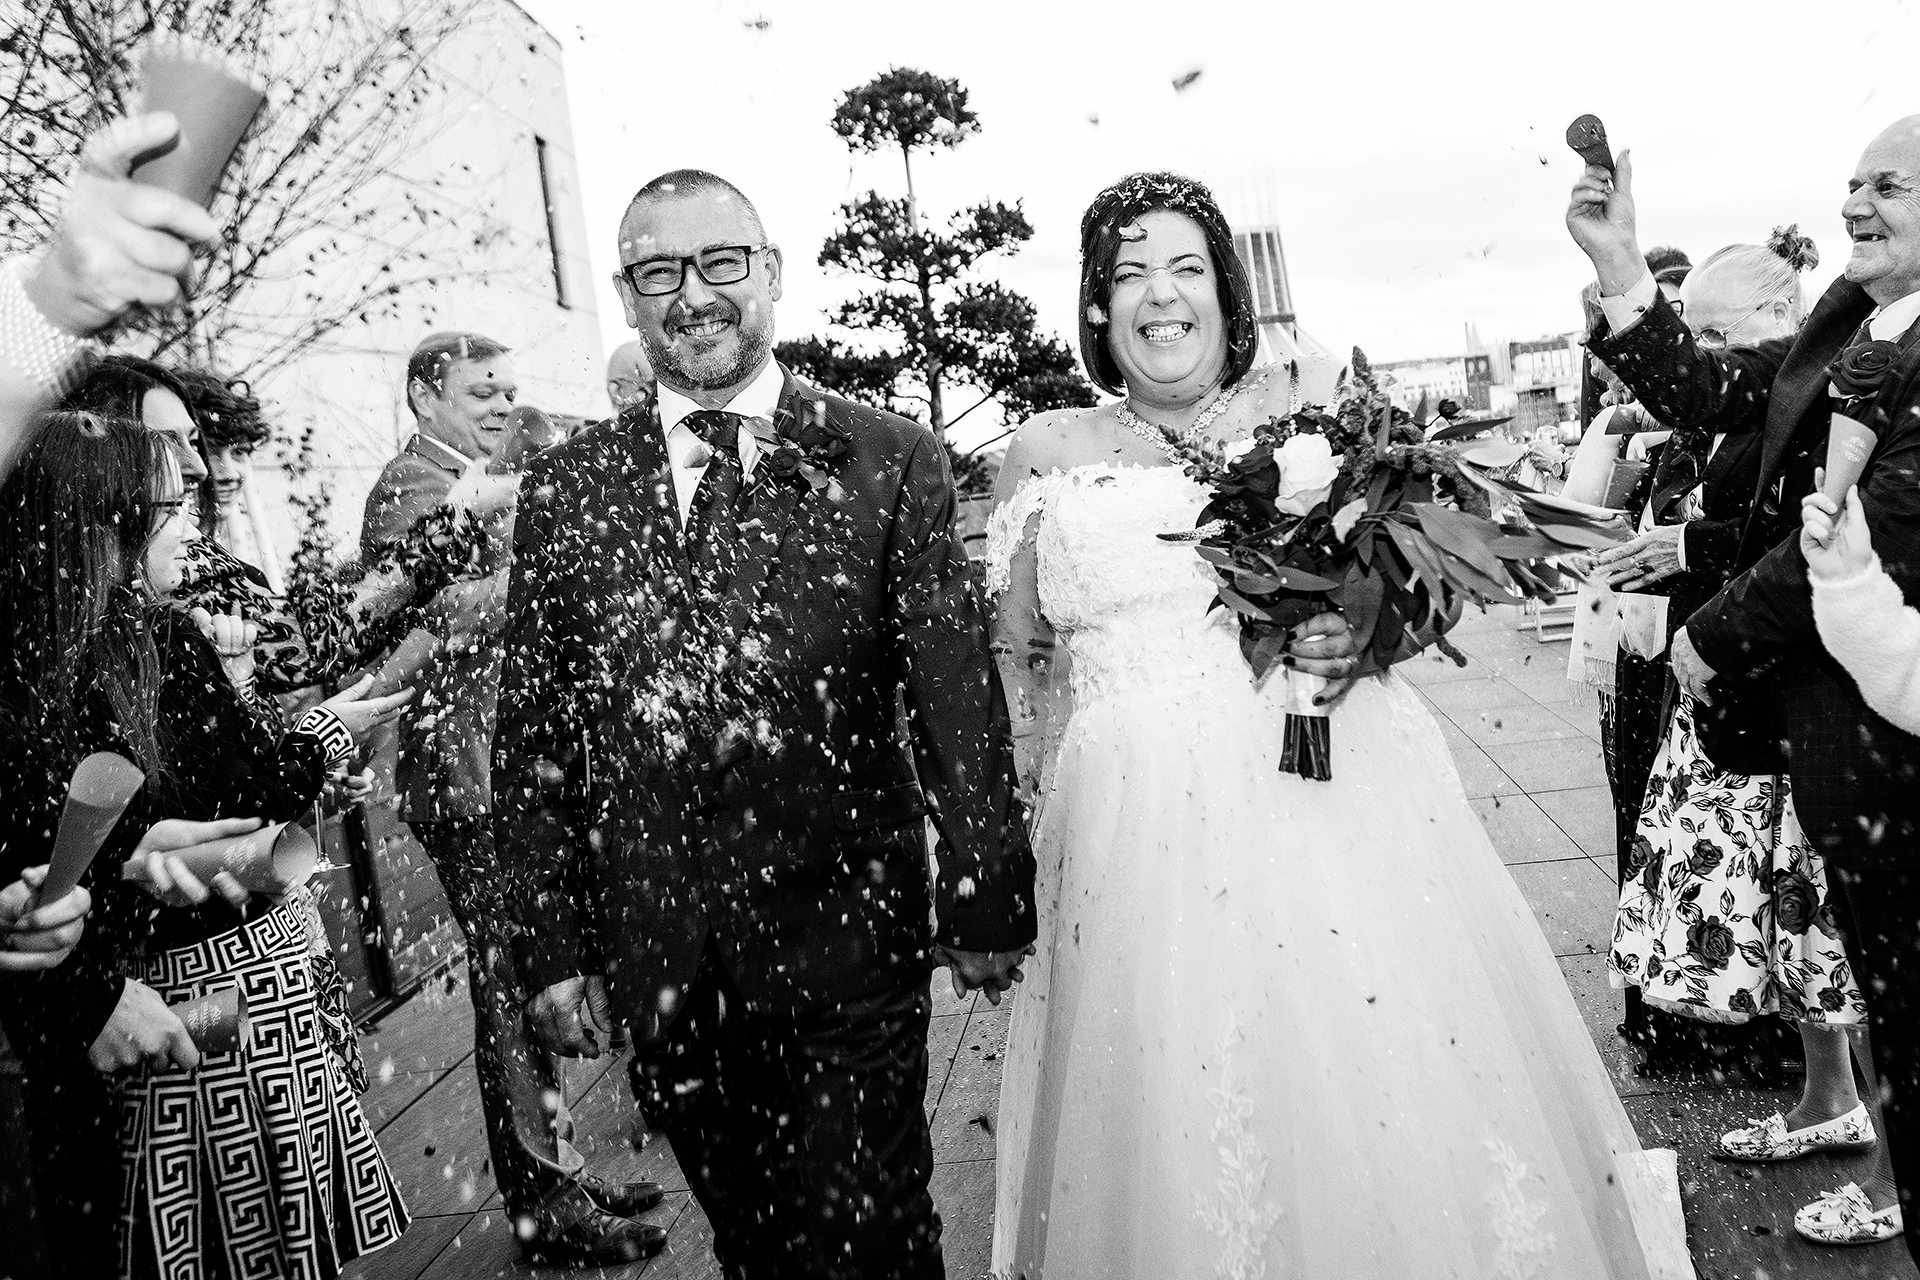 Black and white wedding photography at the Hope street hotel Liverpool